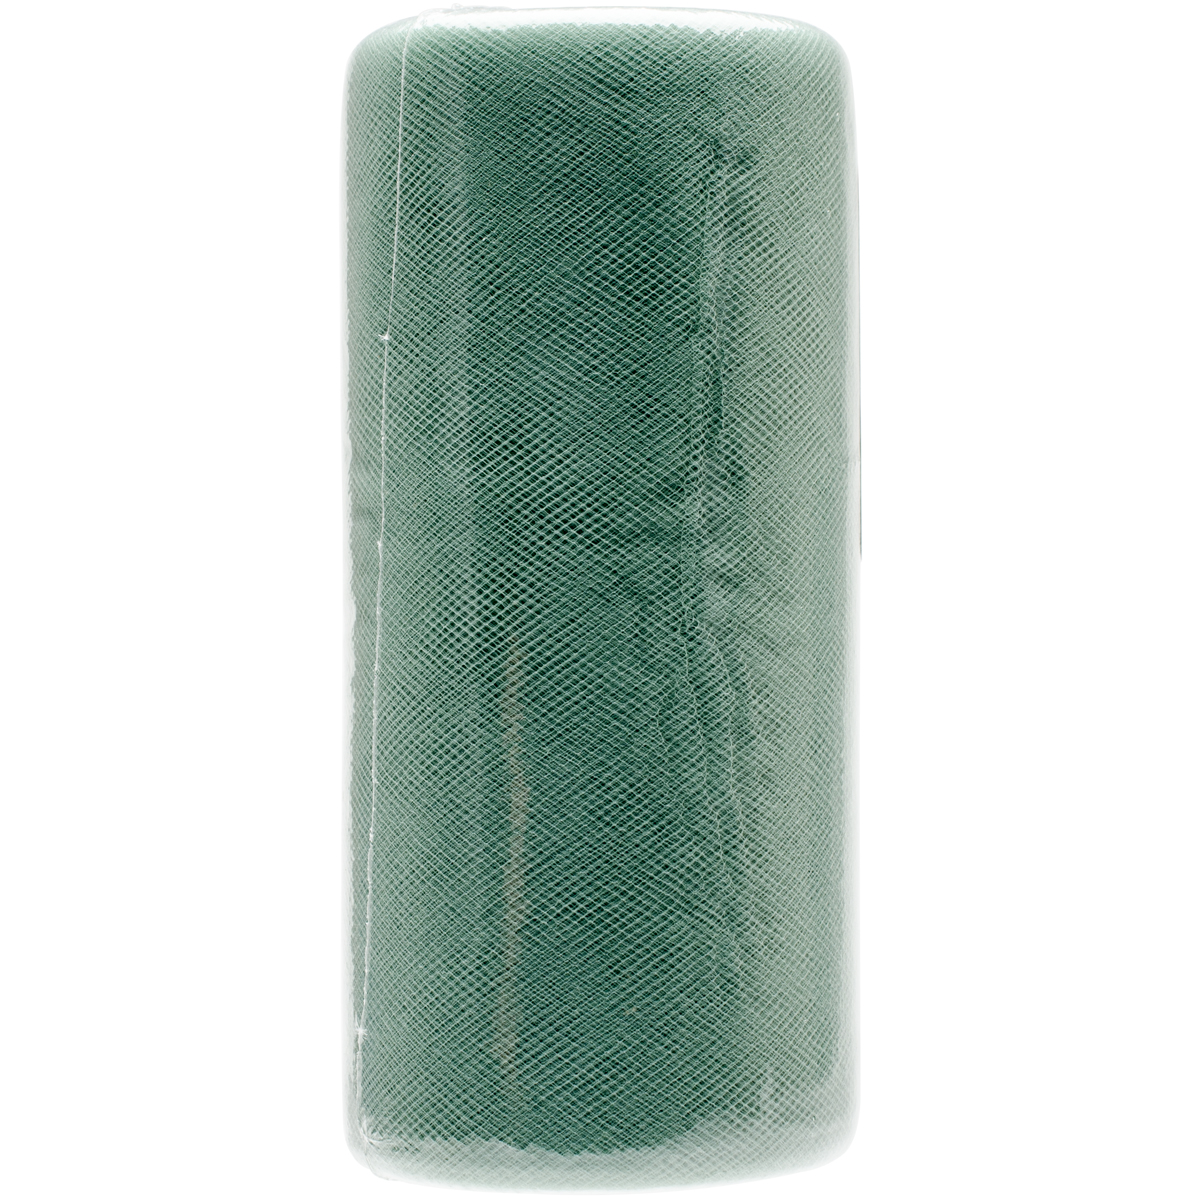 Tulle 6" Wide 25yd Spool-Sage - image 1 of 2